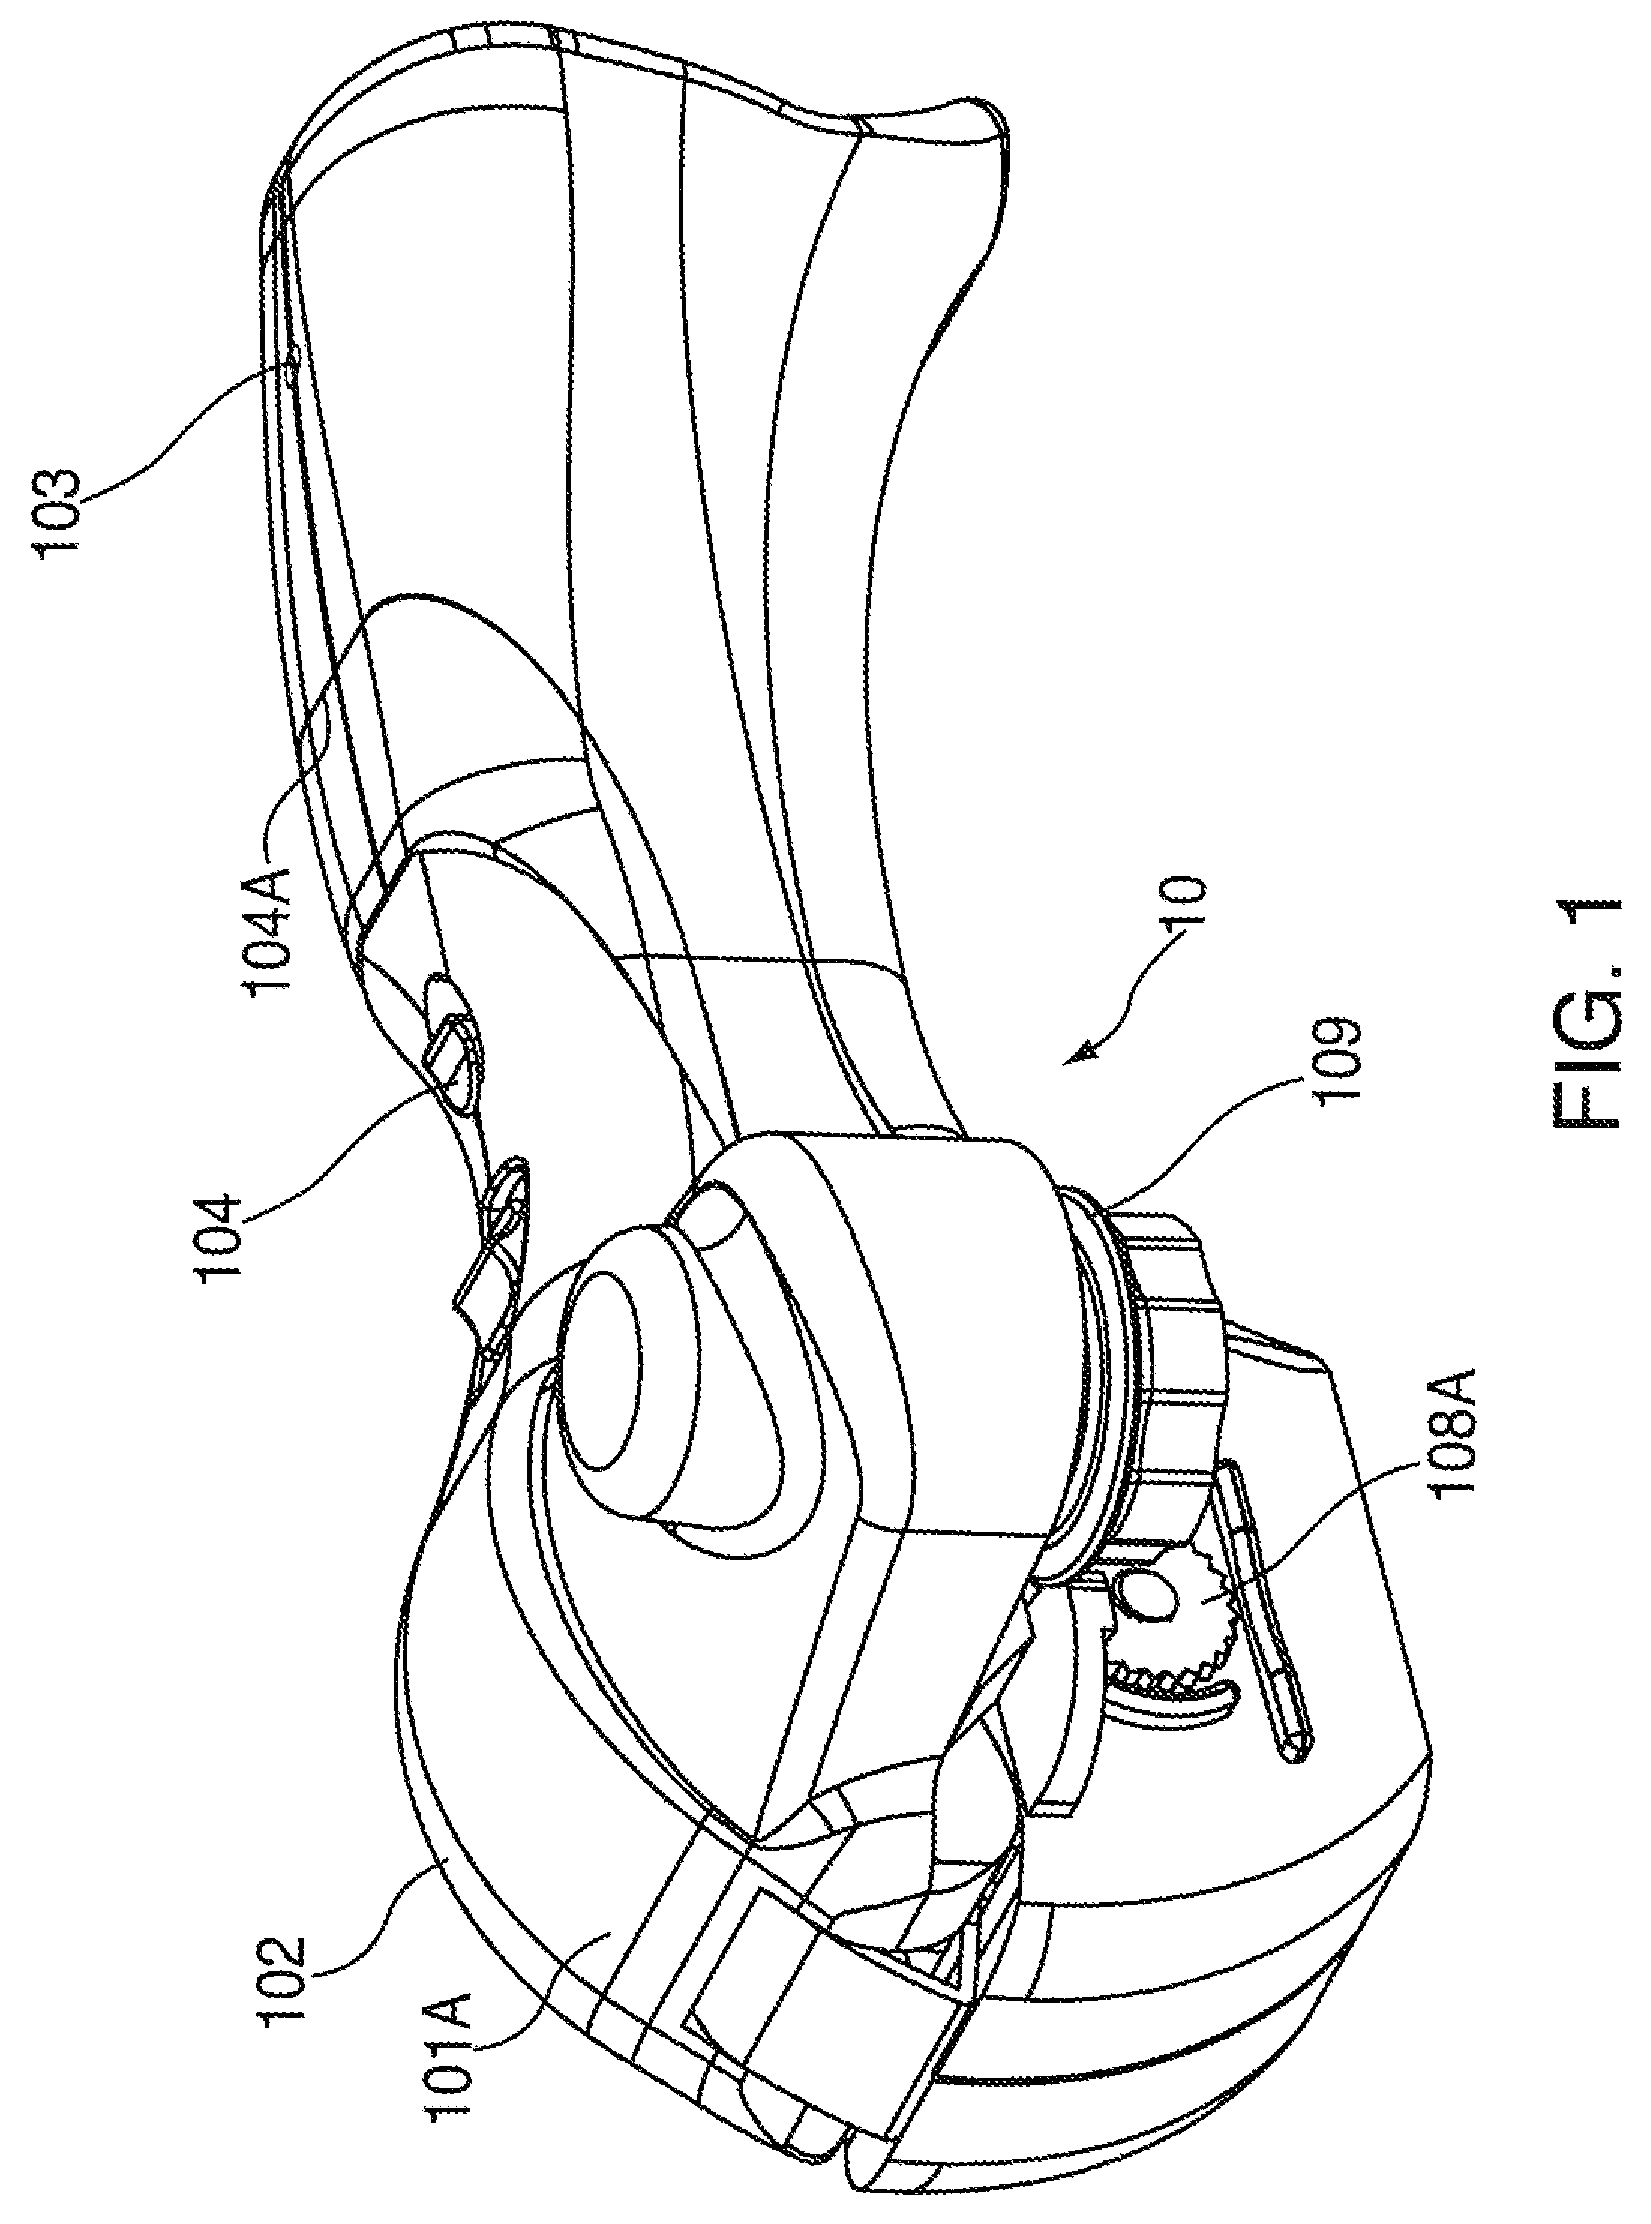 Electric can opener and method of opening a can